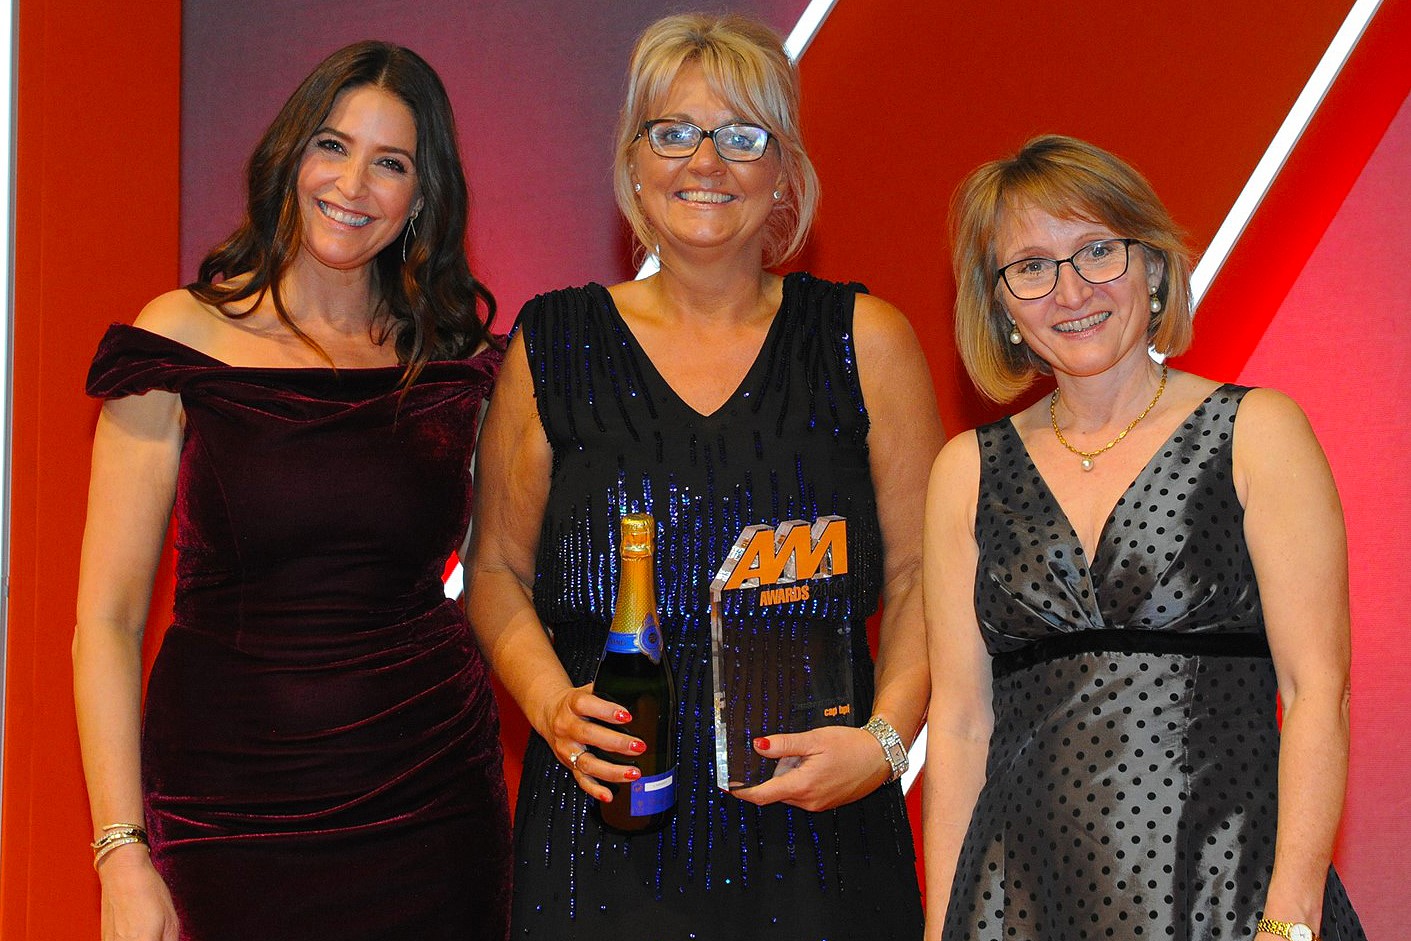 Wendy Swaine, head of sales (retail), Cap HPI,  accepts the award from Julia Pennington, managing  director, Copeland Automotive Recruitment, right, and host Lisa Snowdon, left